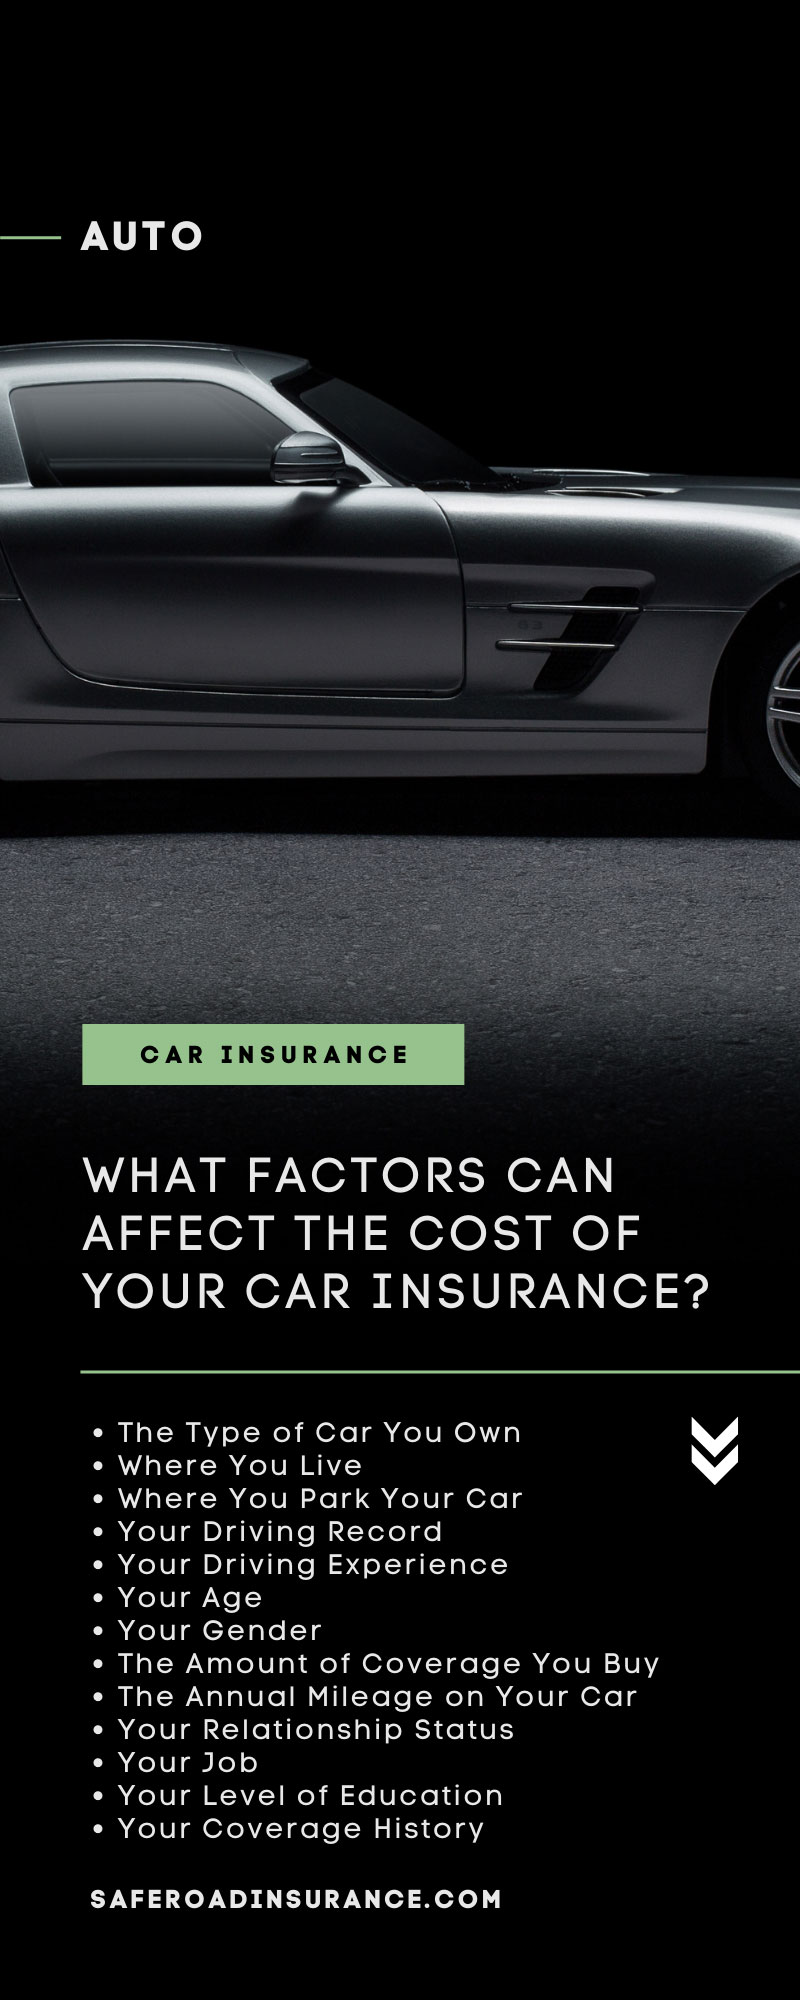 What Factors Can Affect the Cost of Your Car Insurance?